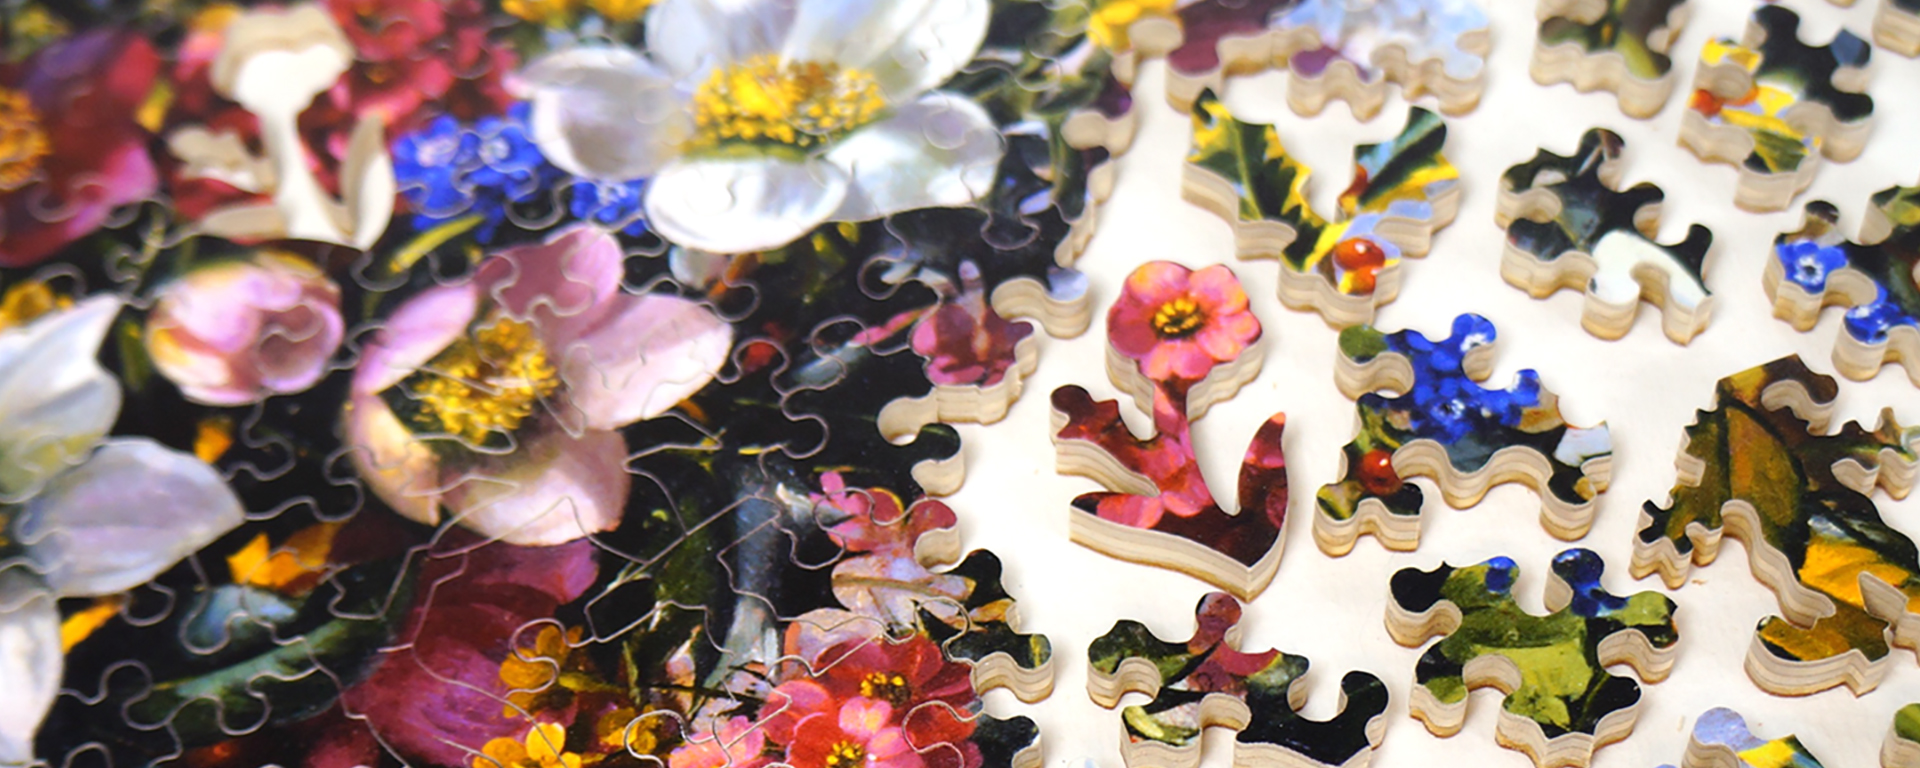 Wooden winter florals jigsaw puzzle in progress featuring a bouquet of white, pink, yellow, and blue flowers.